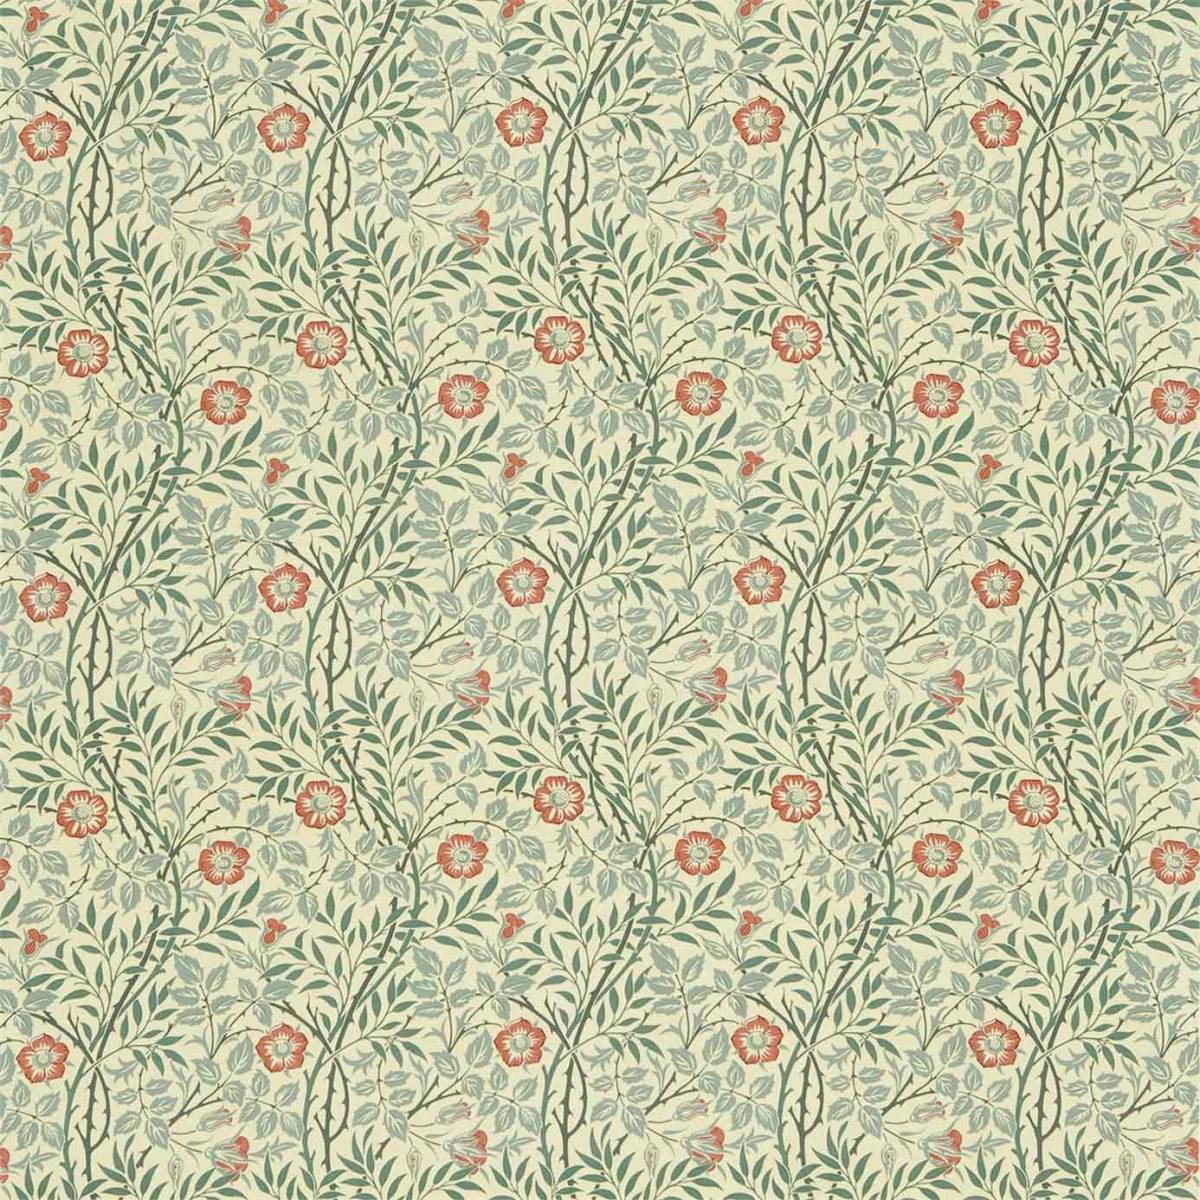 ZOFFANY FABRIC SWEET BRIAR STUNNING FLORAL 